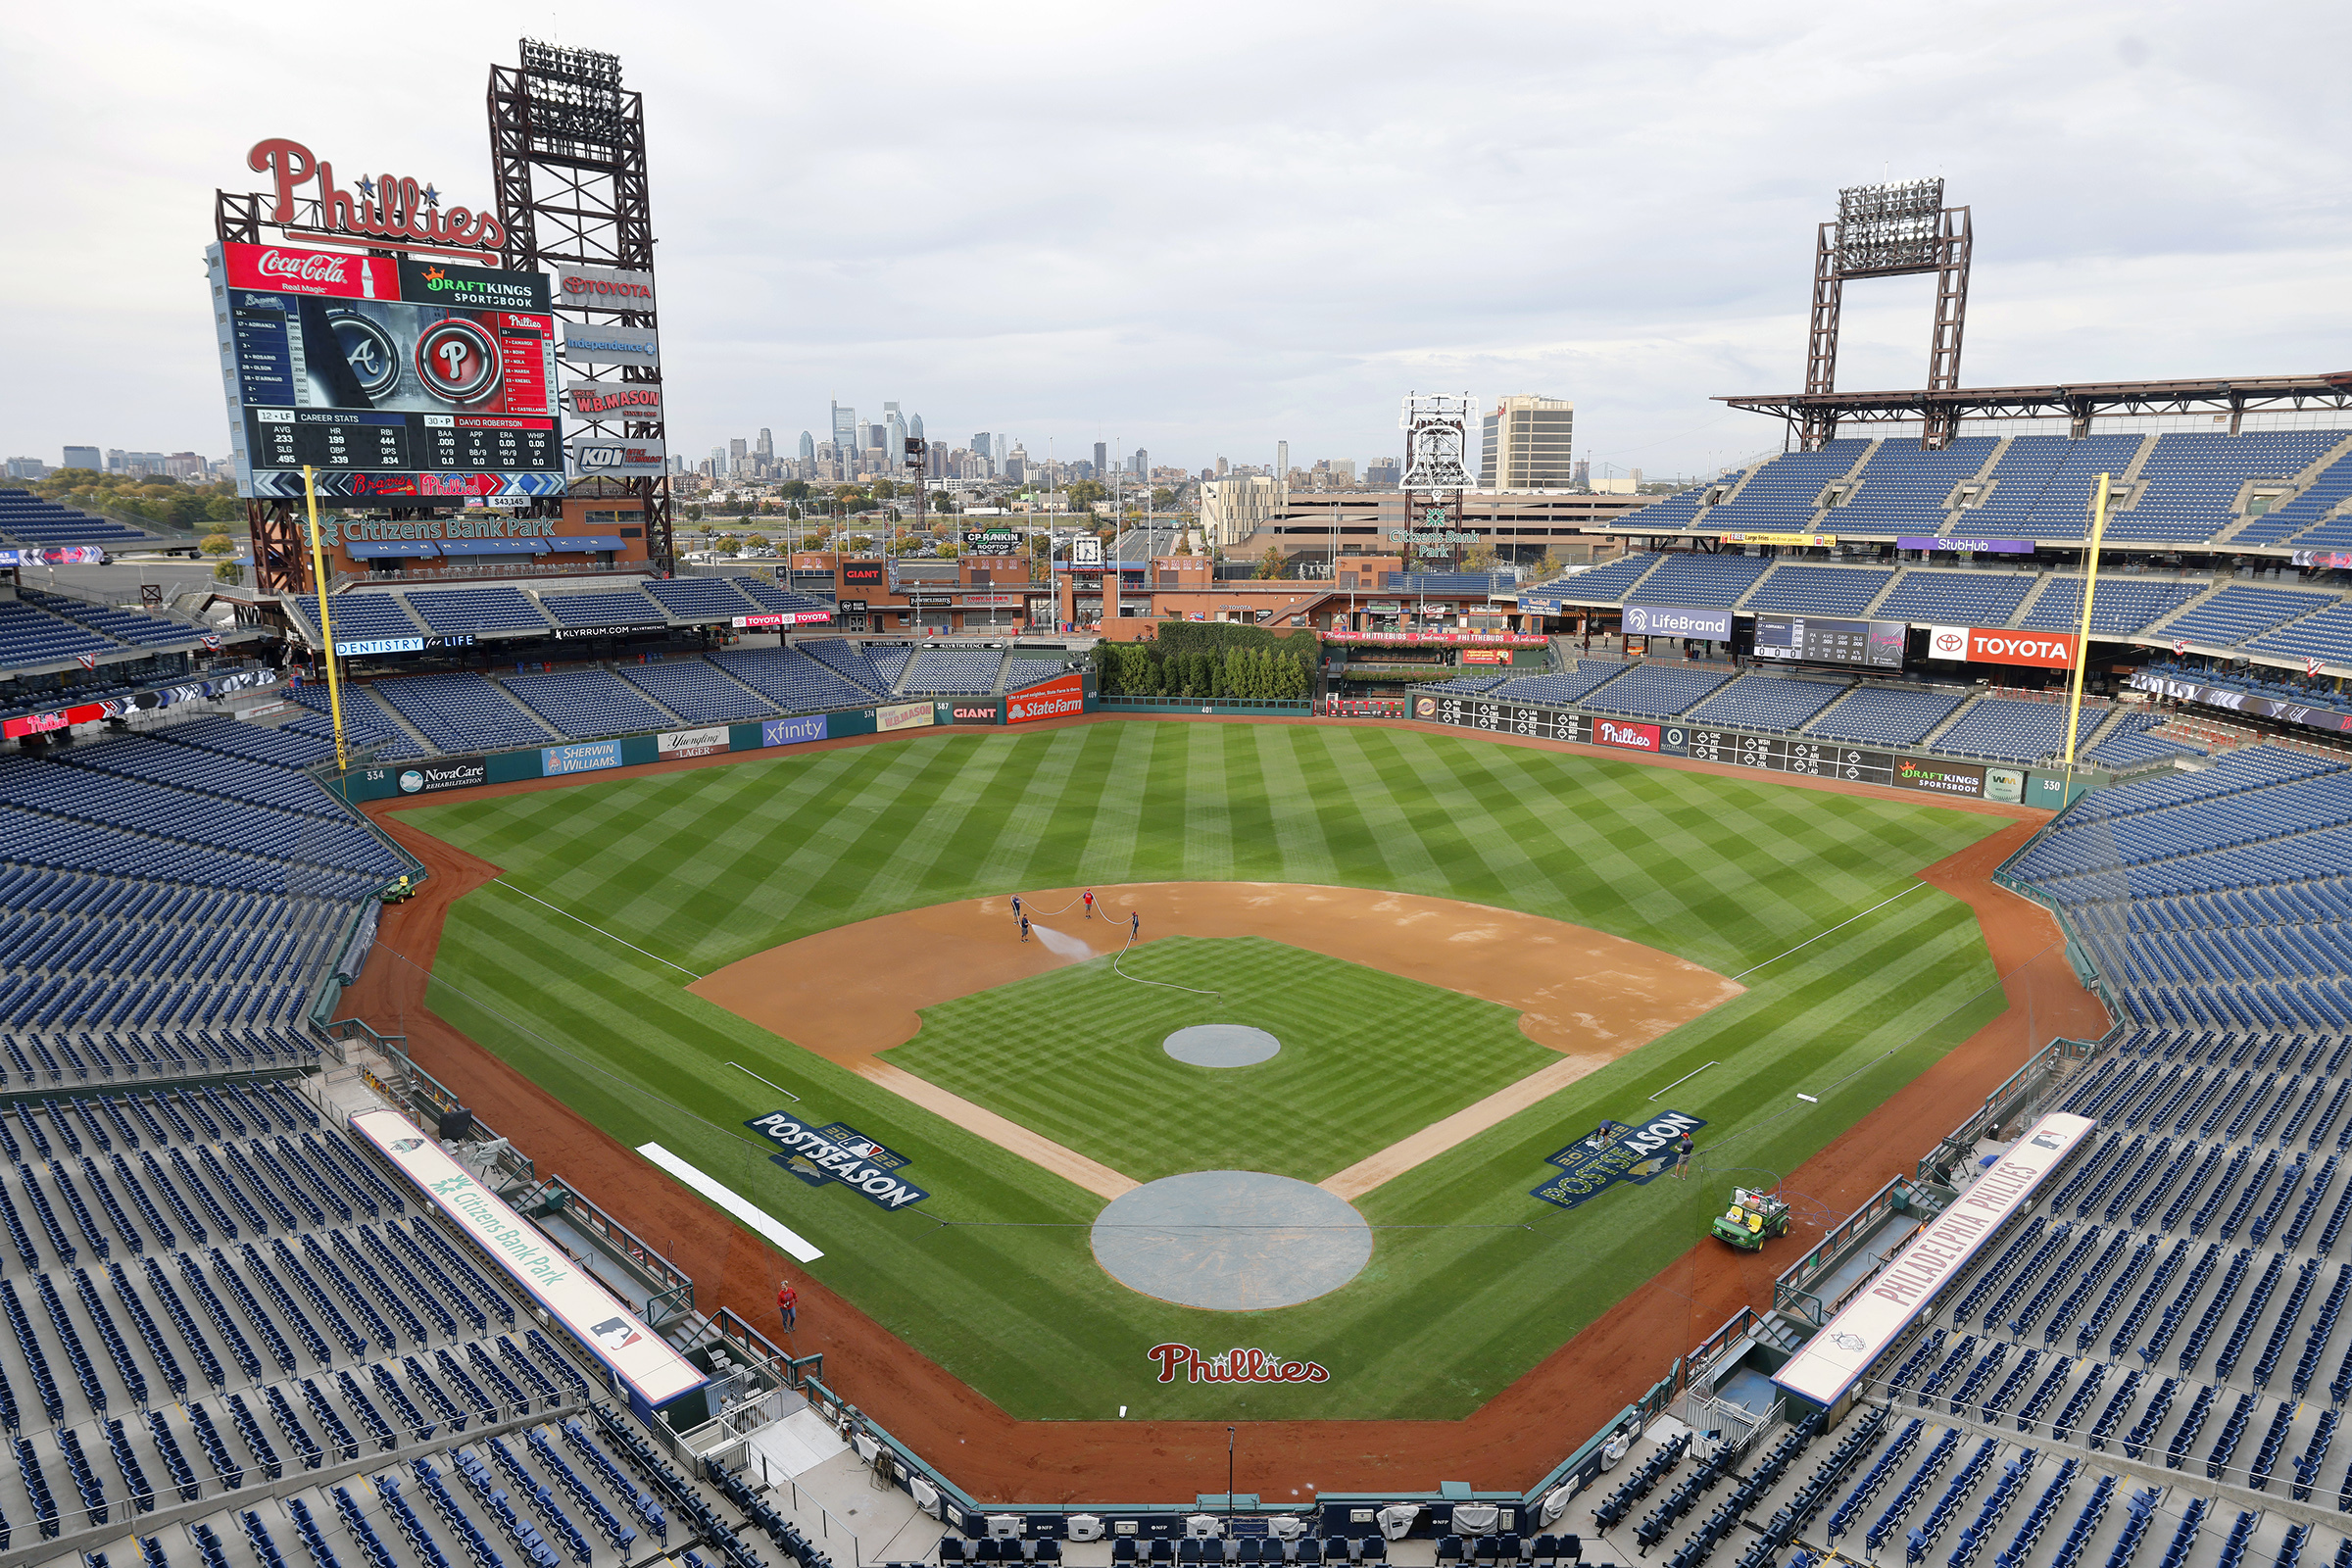 How to Watch the Braves vs. Phillies Game: Streaming & TV Info